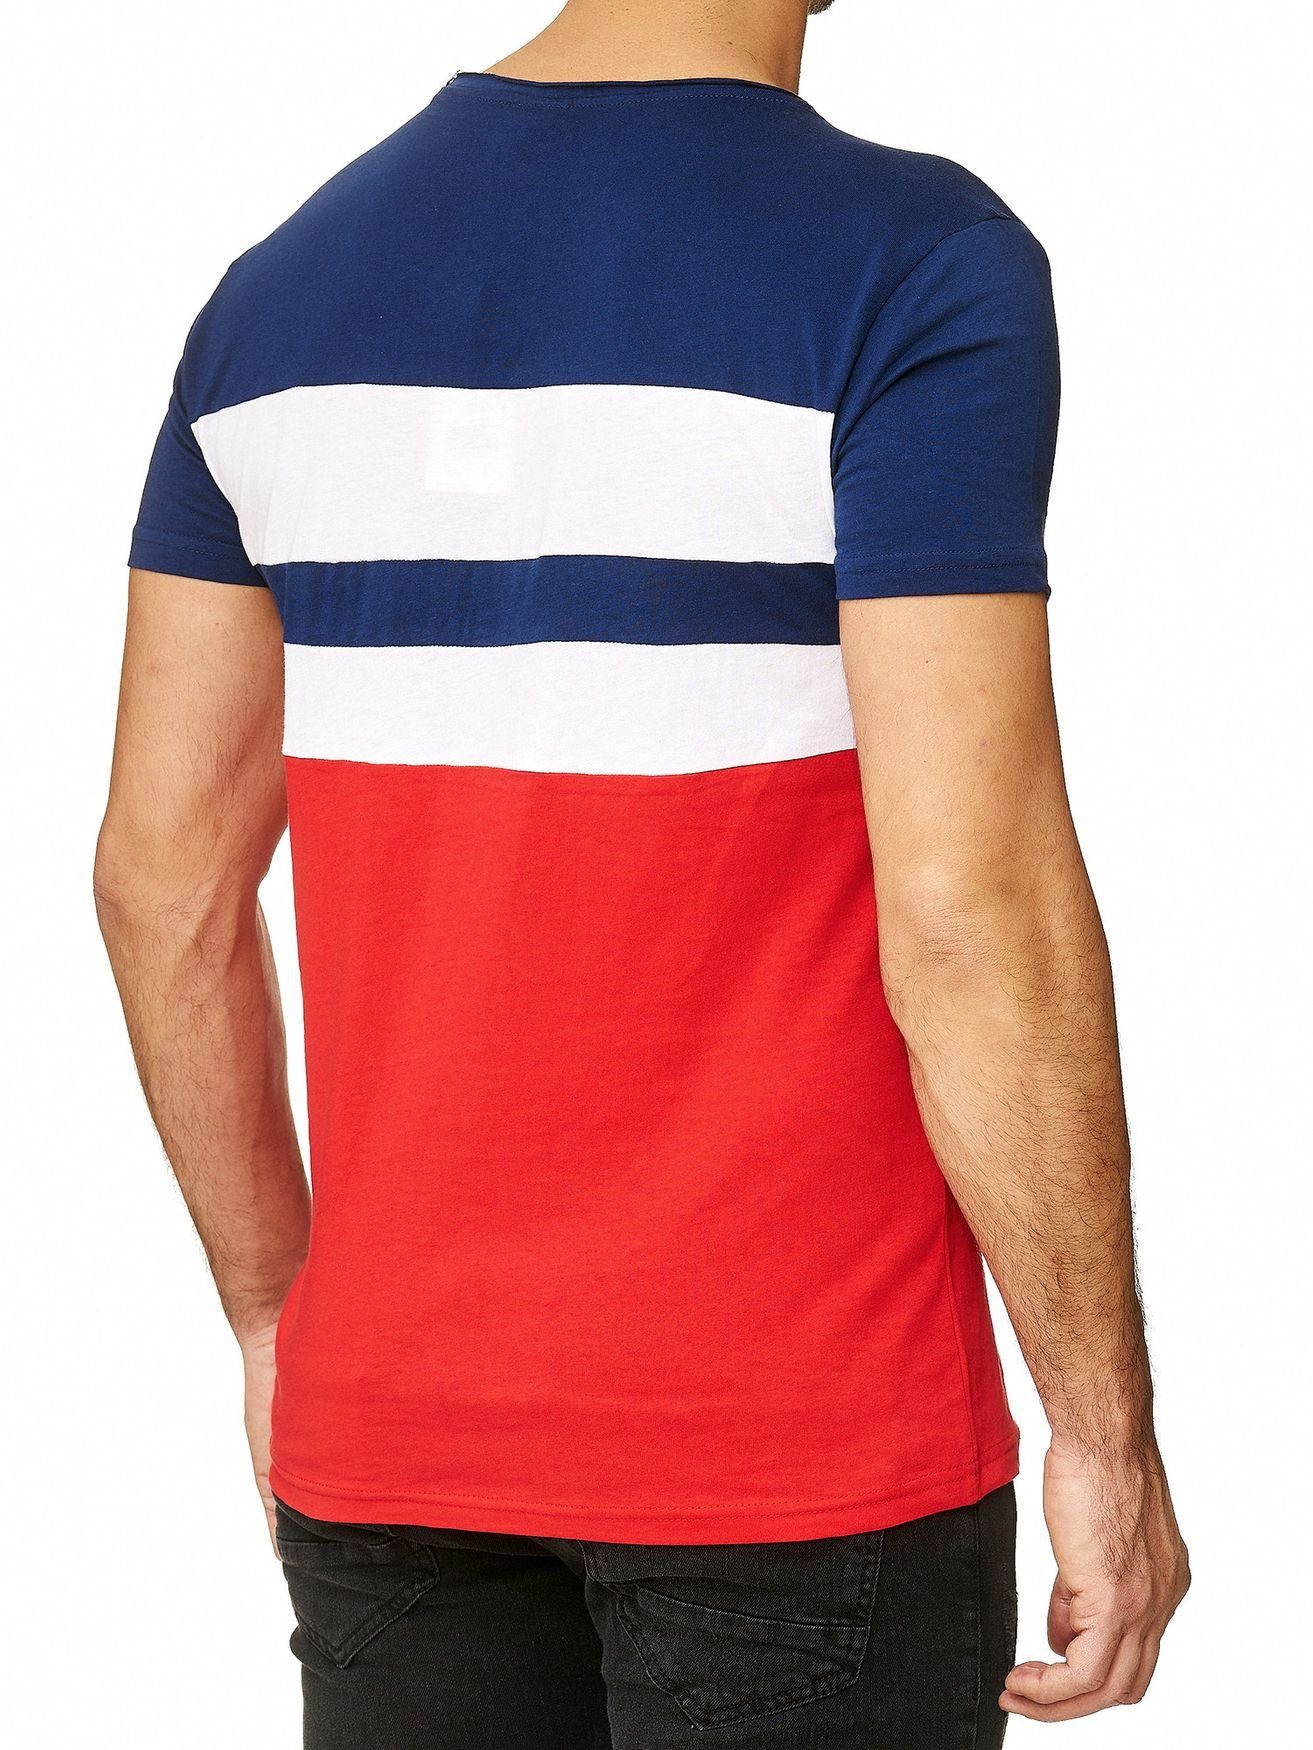 T-Shirt T-Shirt in Streifen Farbig 2670 Colorblock O-Neck (1-tlg) SUBLEVEL Rot